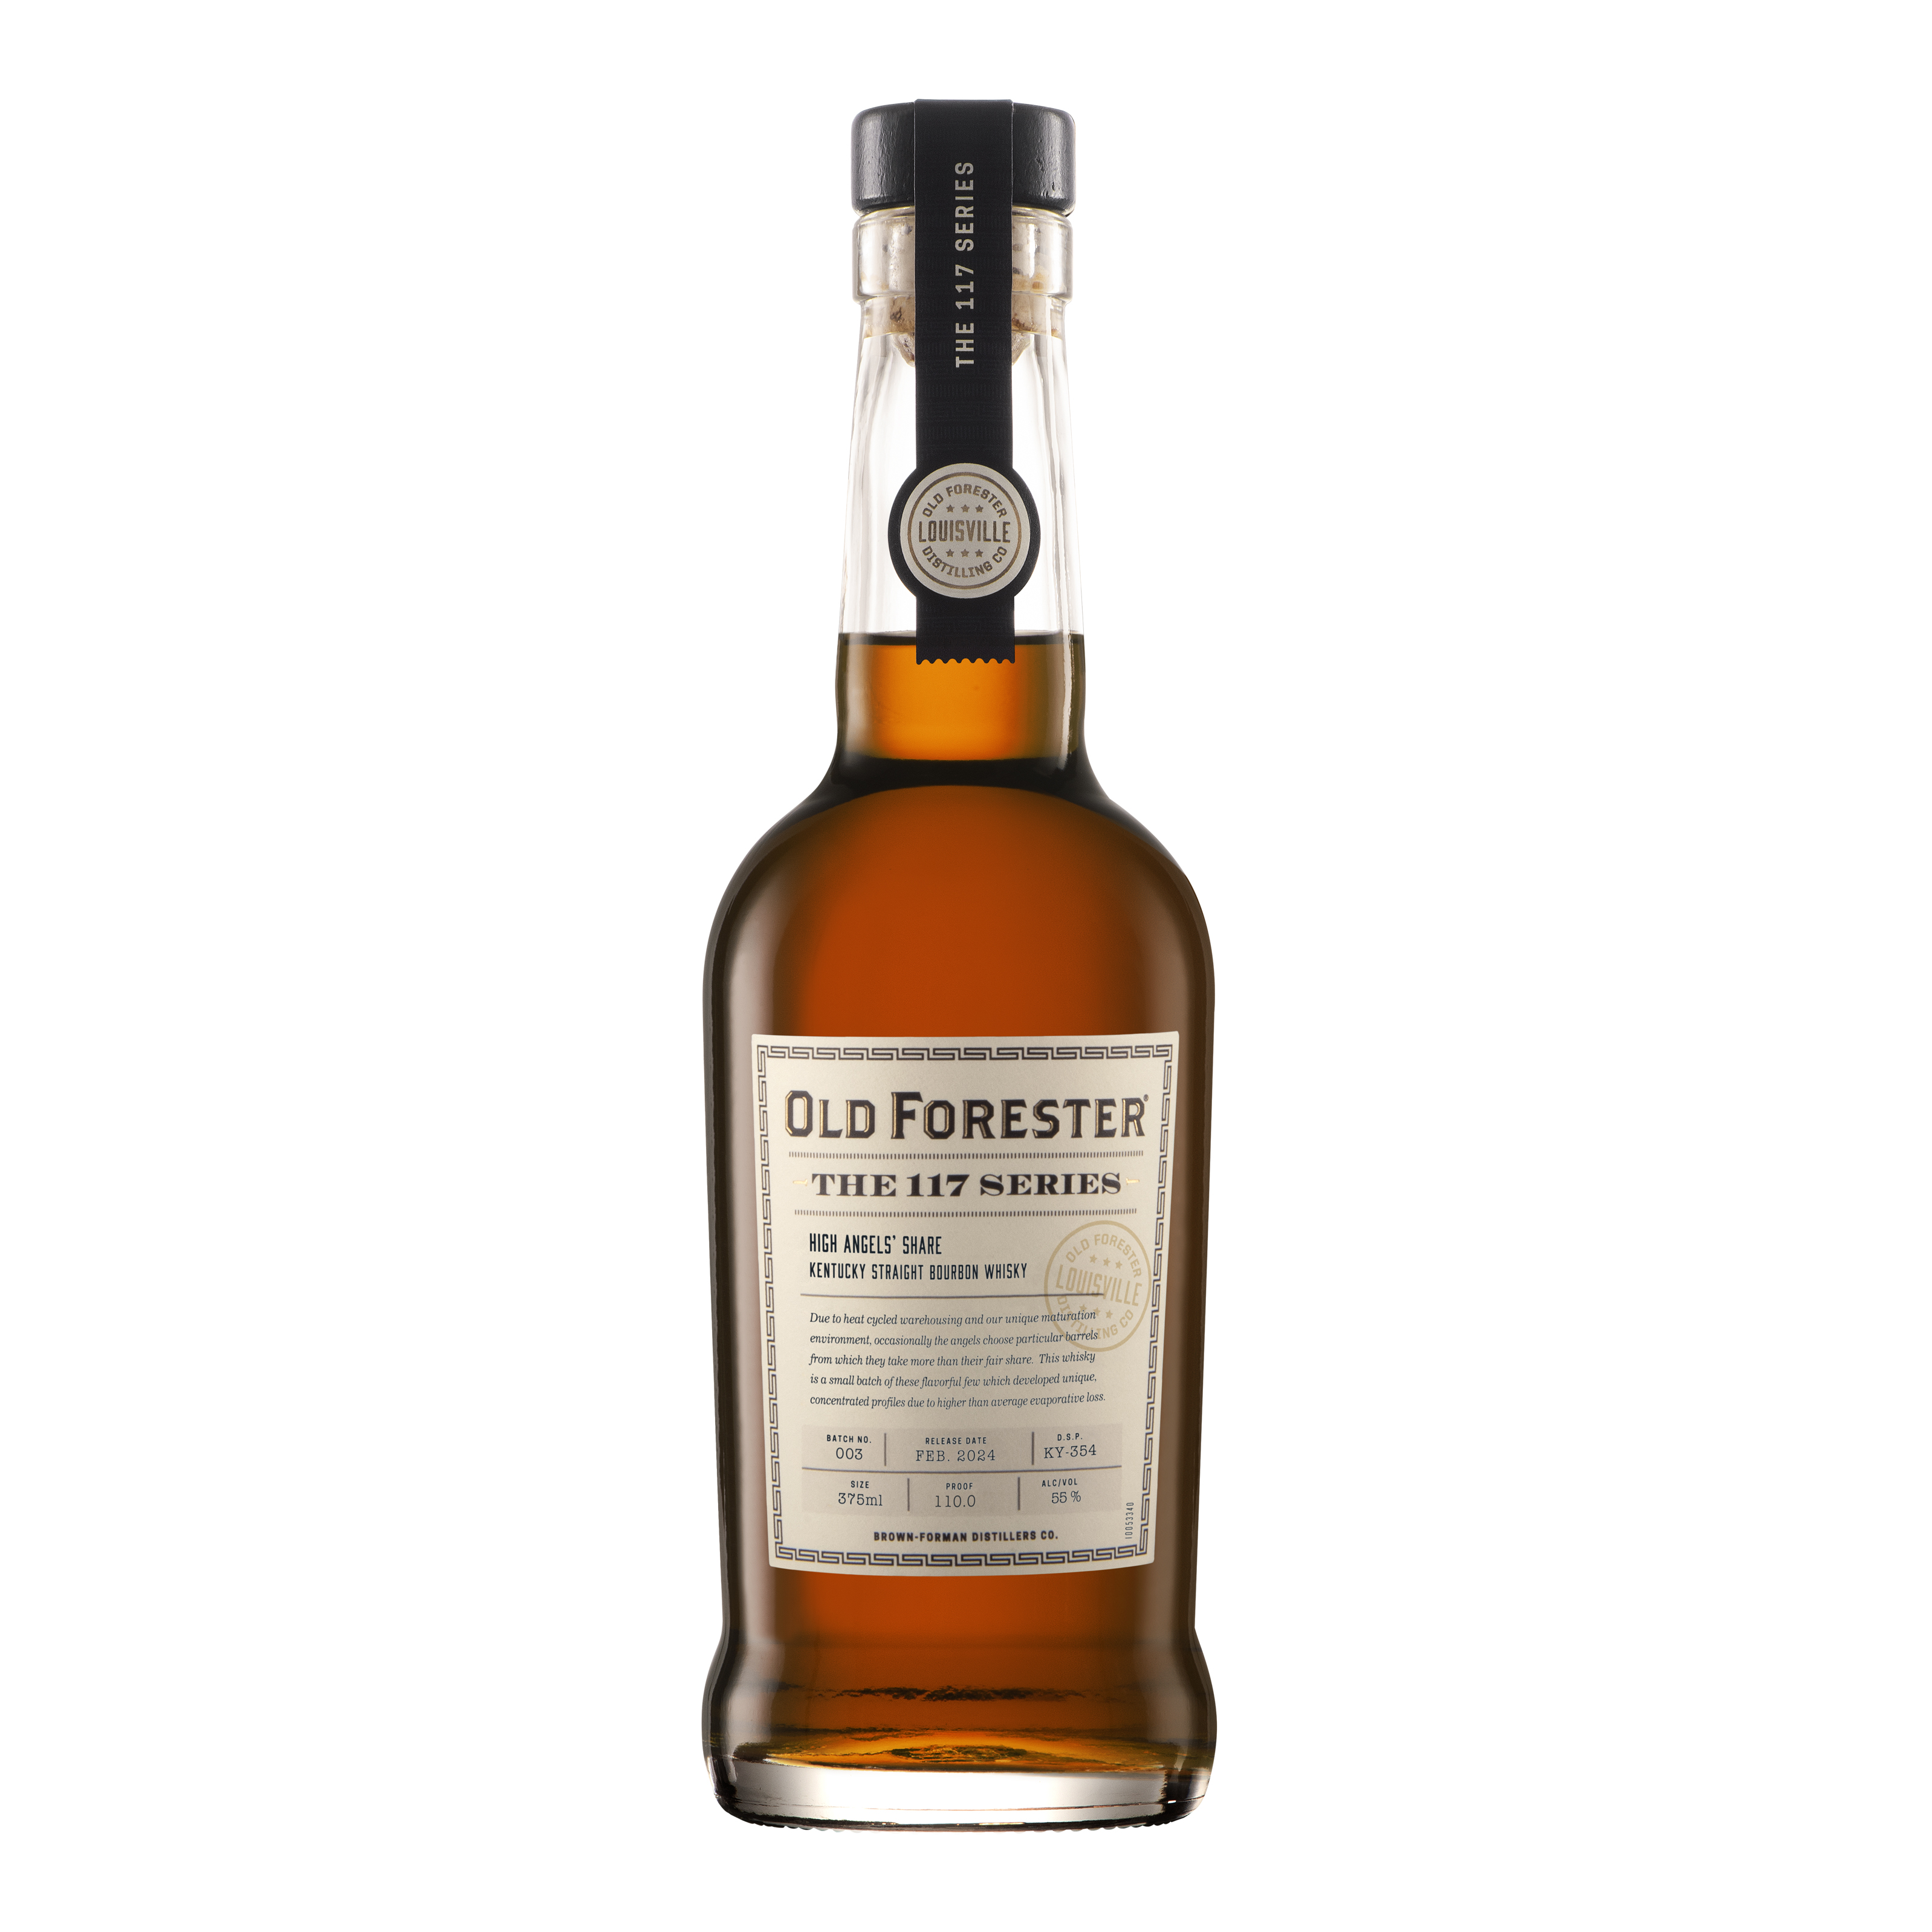 Old Forester Releases 117 Series: High Angels’ Share Batch 3